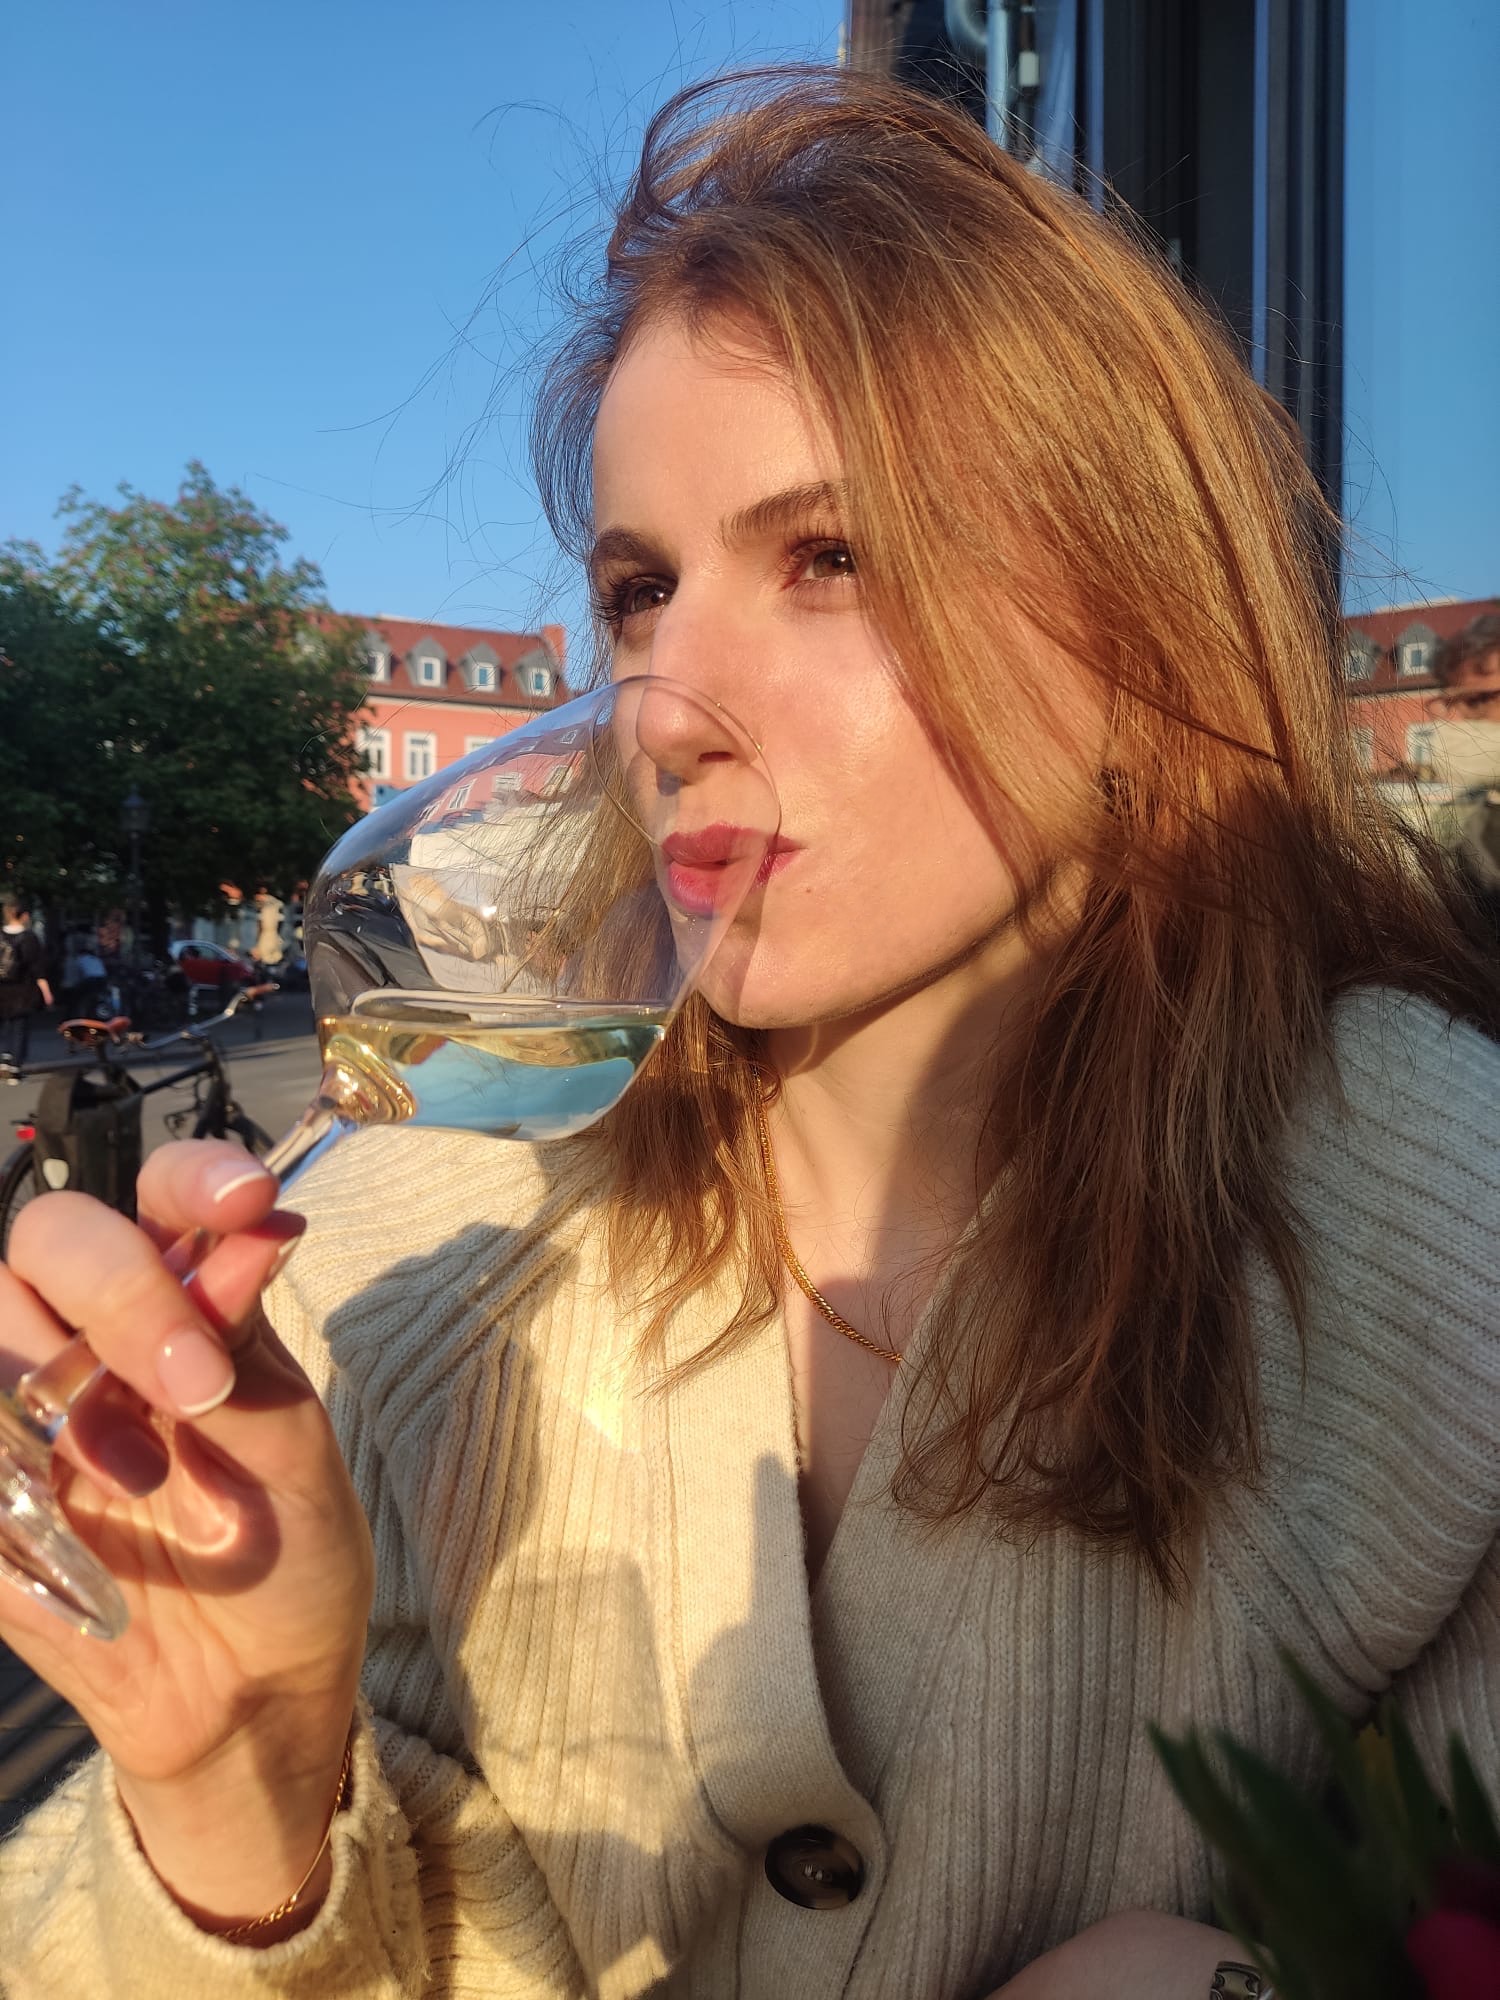 Emily sipping wine in Germany.